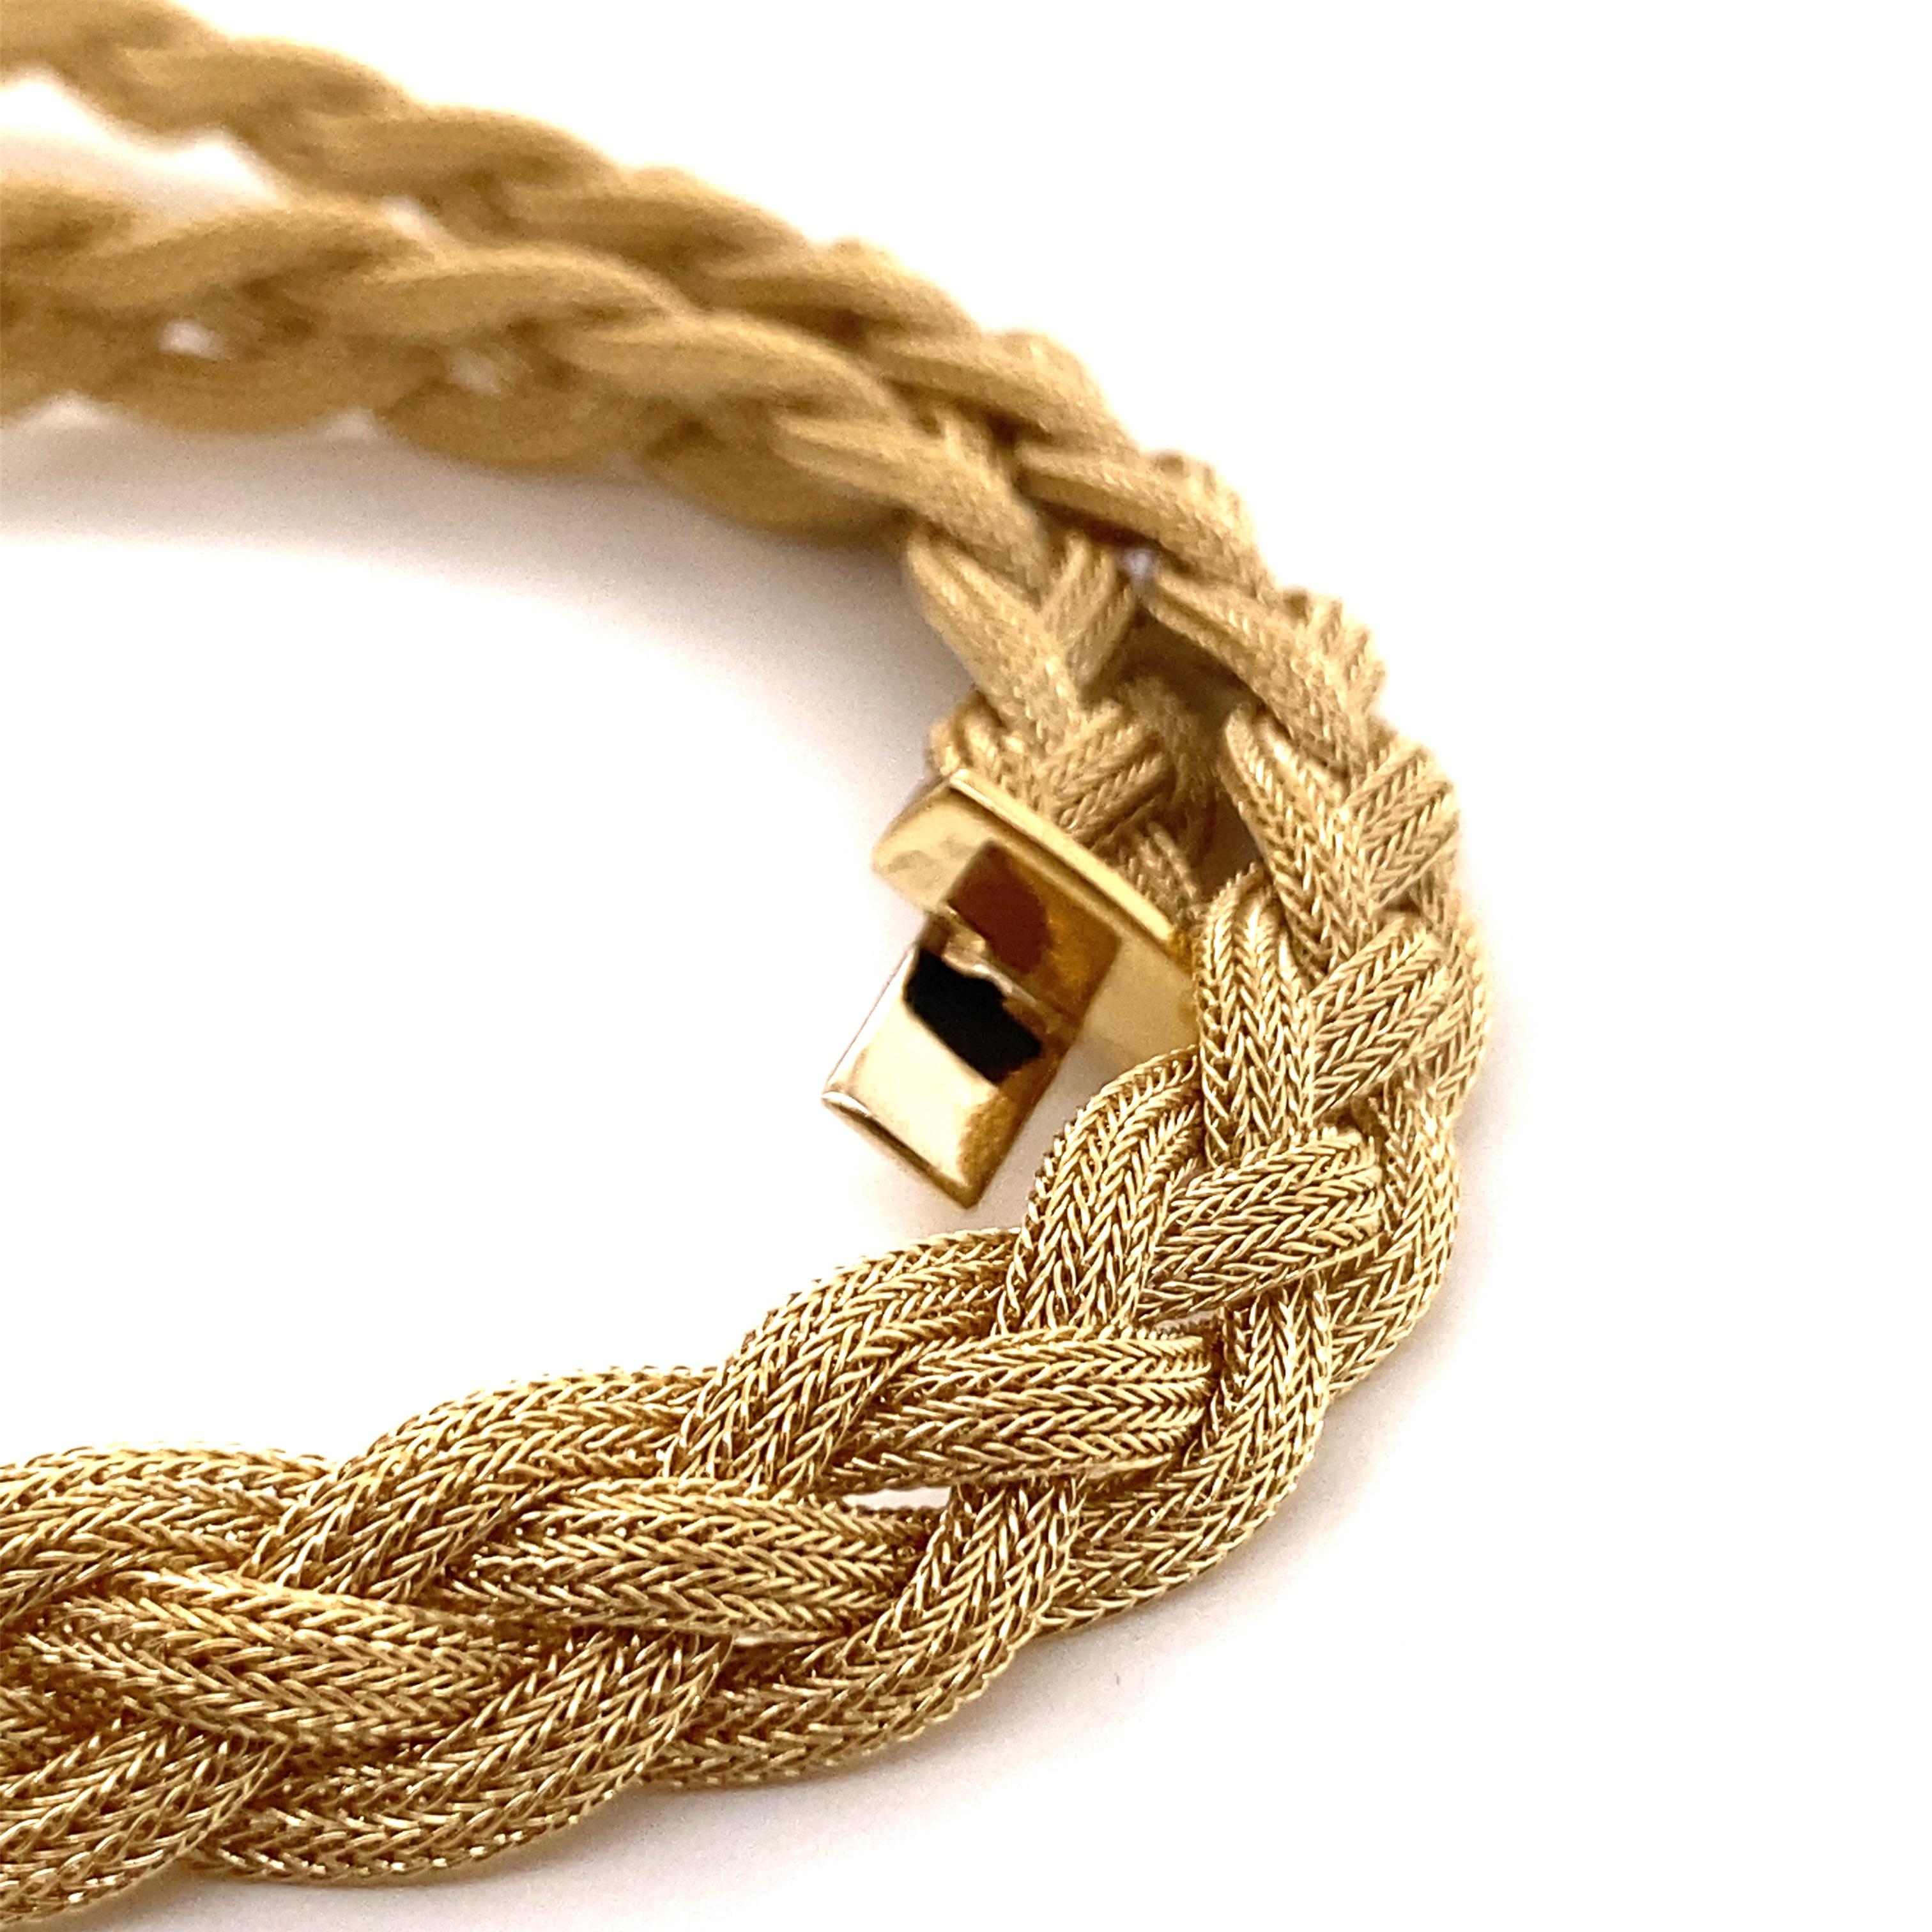 Vintage 2000’s 14K Yellow Gold Braided Necklace - The Italian made braided woven gold necklace is 10mm wide and 16 inches long. The necklace has a plunger clasp in the back with a figure 8 safety and weighs 38 grams.